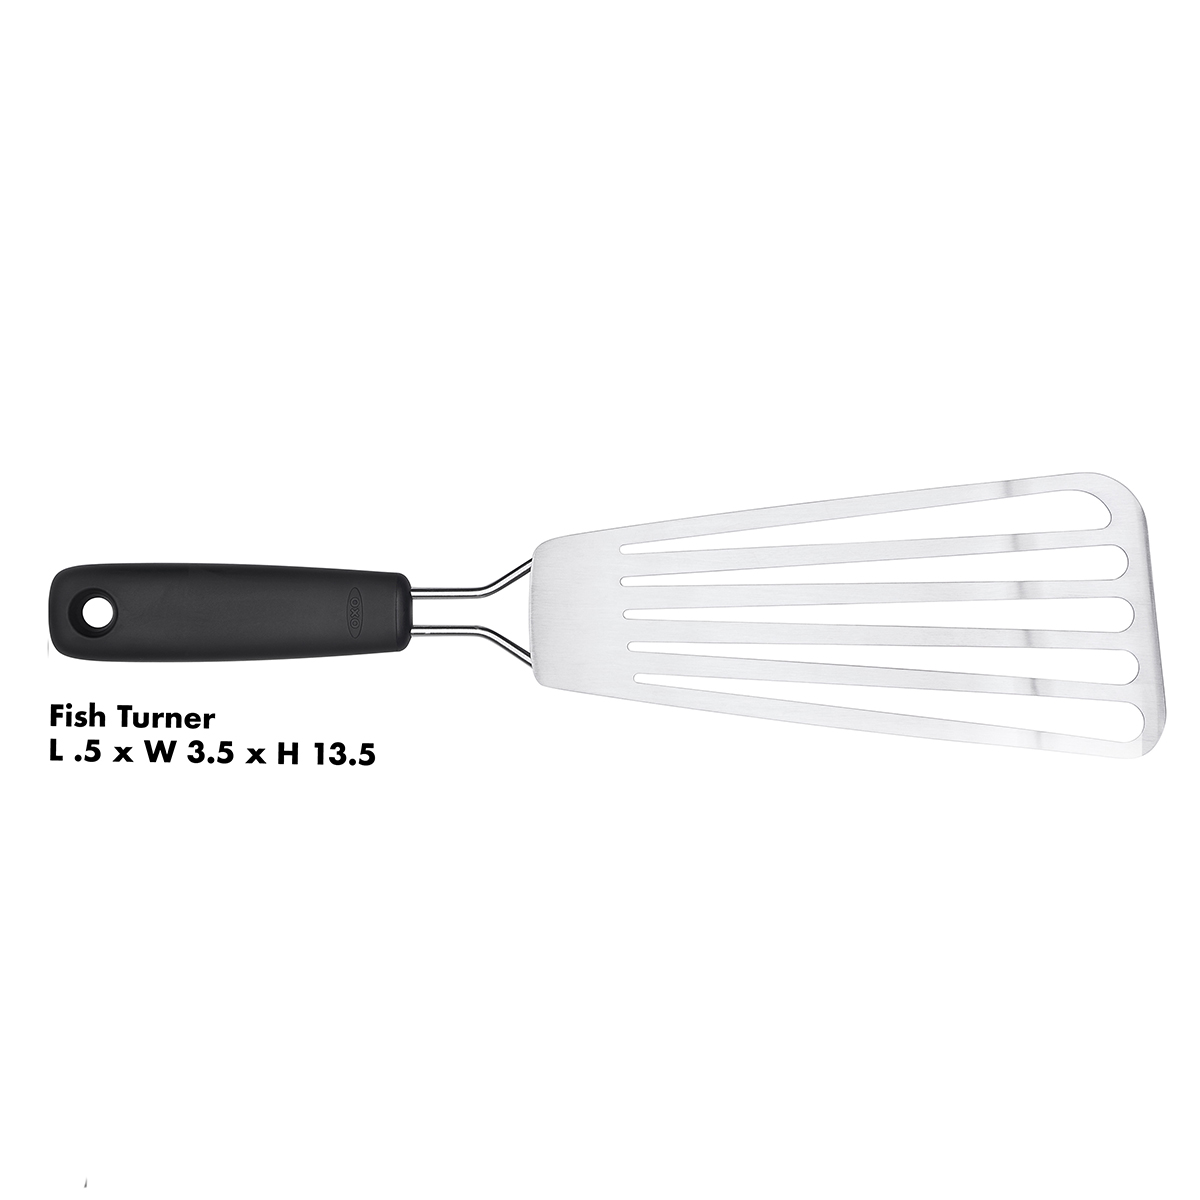 https://www.containerstore.com/catalogimages/424948/10086159-OXO-Fish-Turner-VEN-DIM.jpg